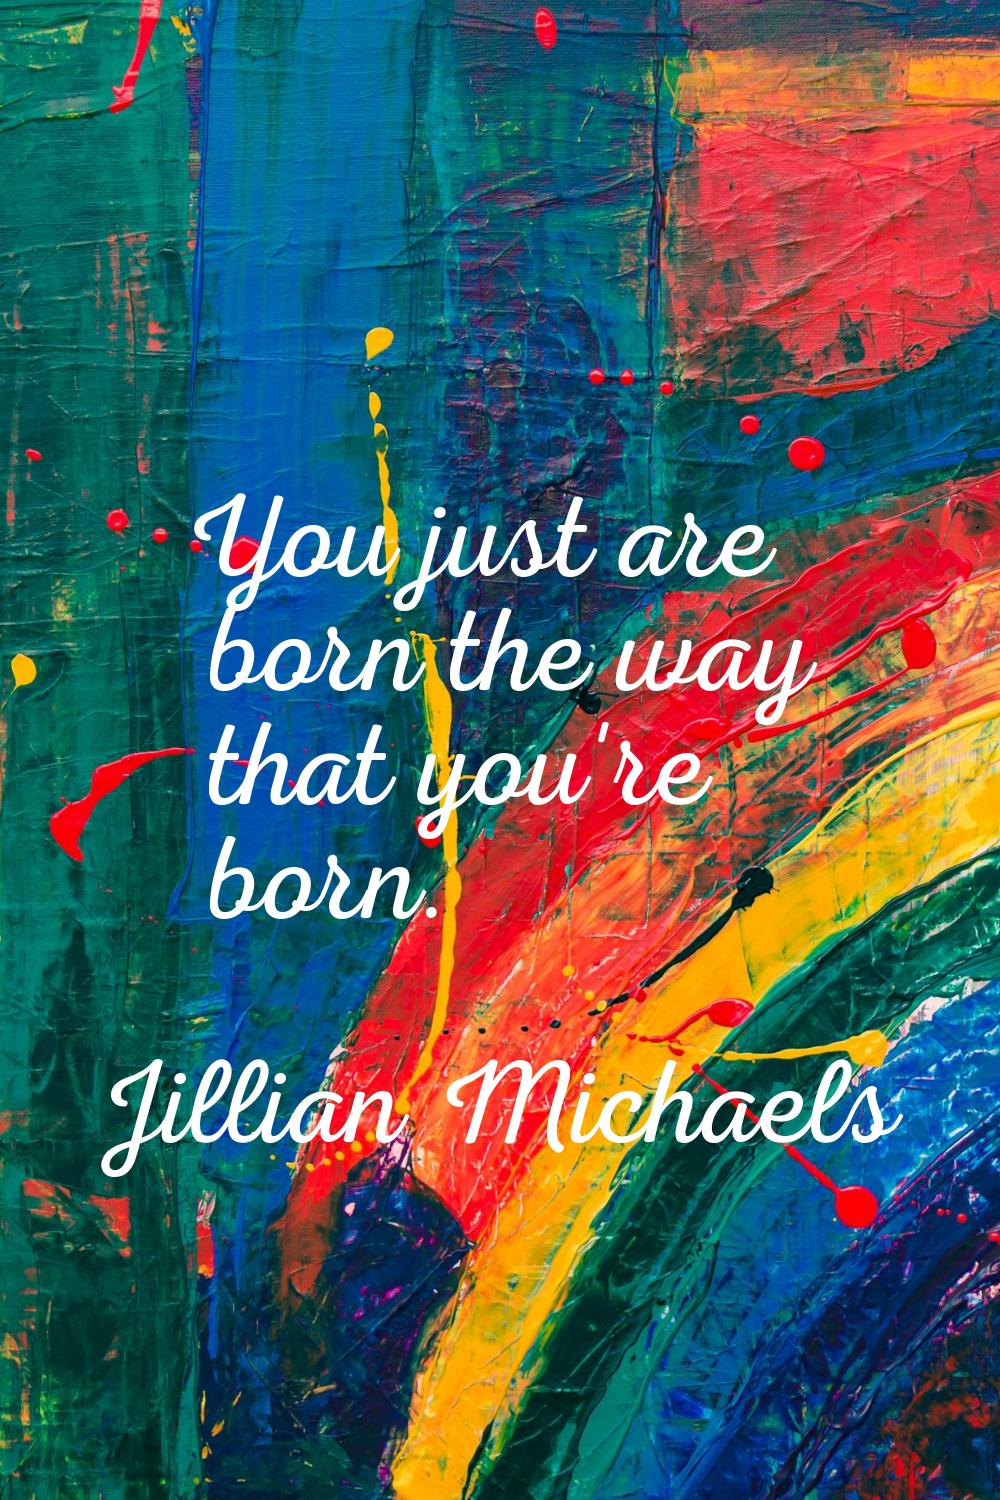 You just are born the way that you're born.